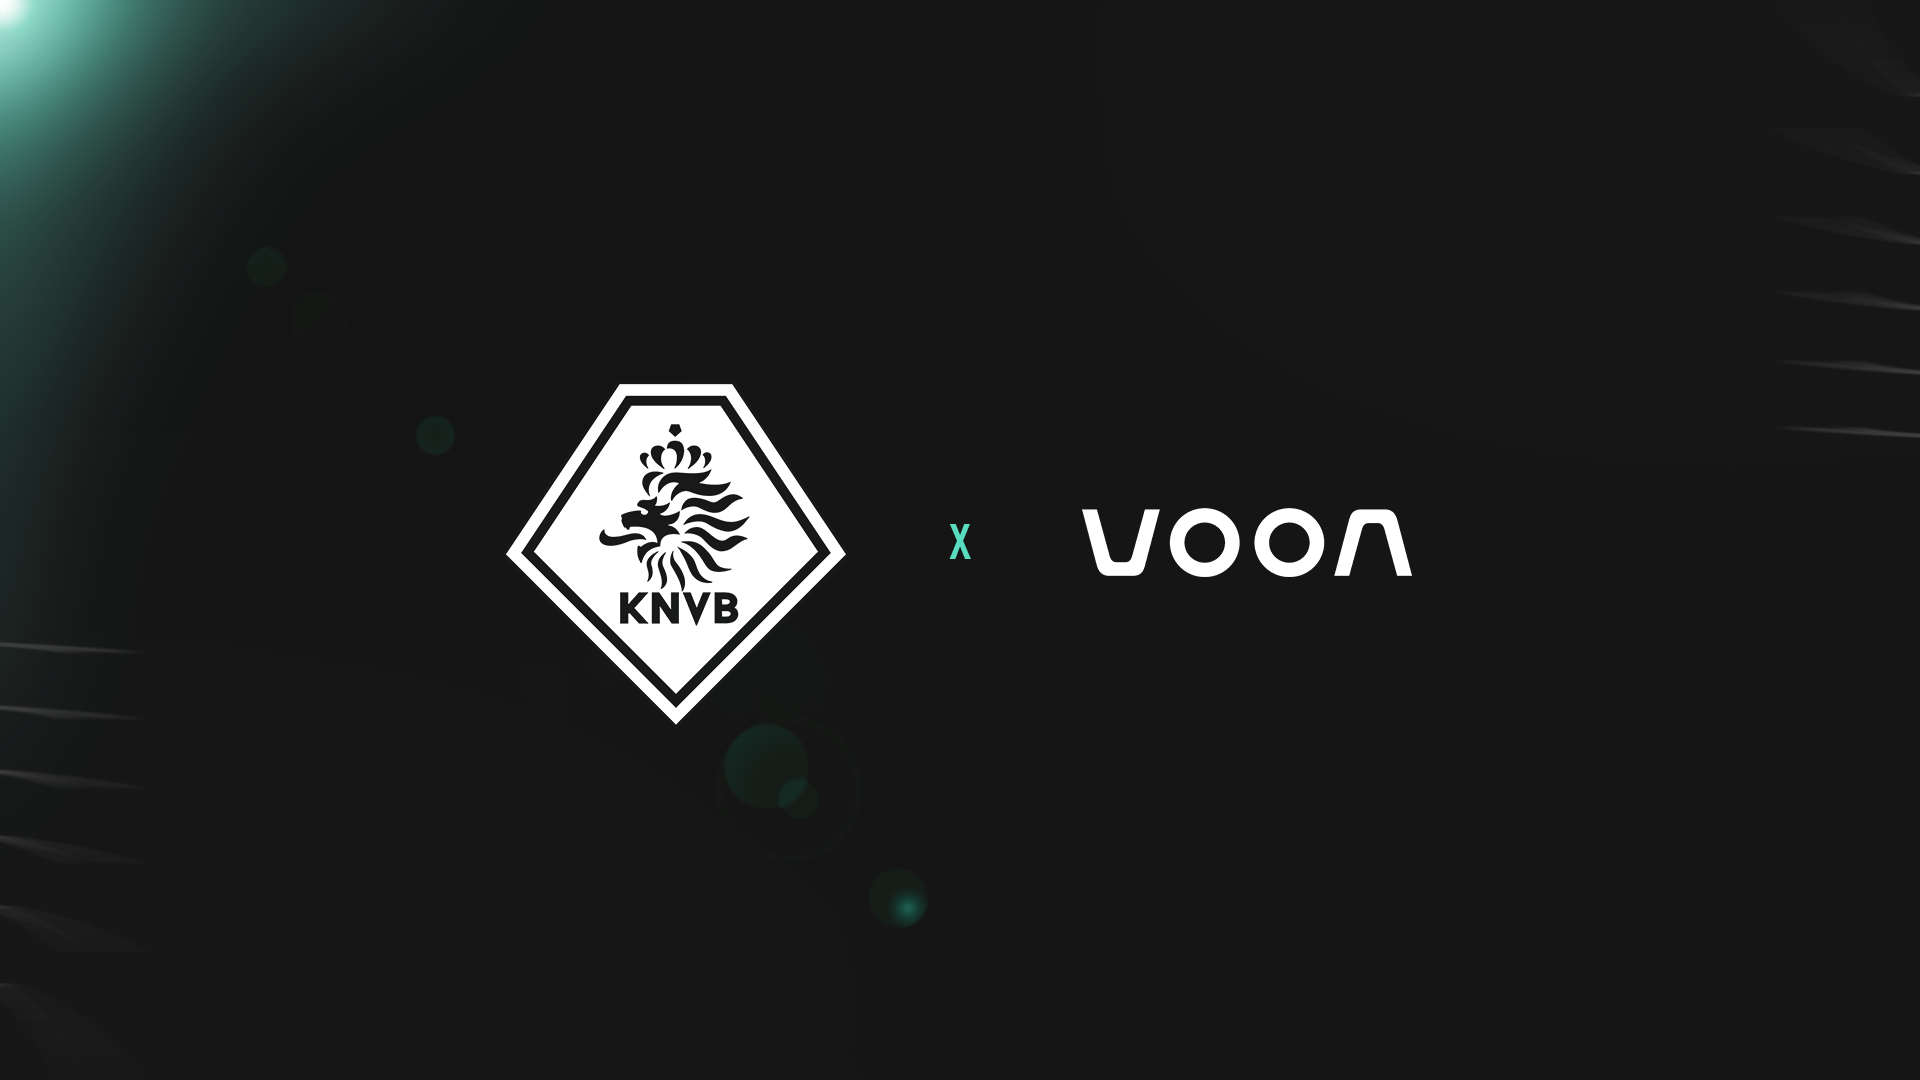 Voon Sports and KNVB Innovation Hub Join Forces to Drive Football Innovation.